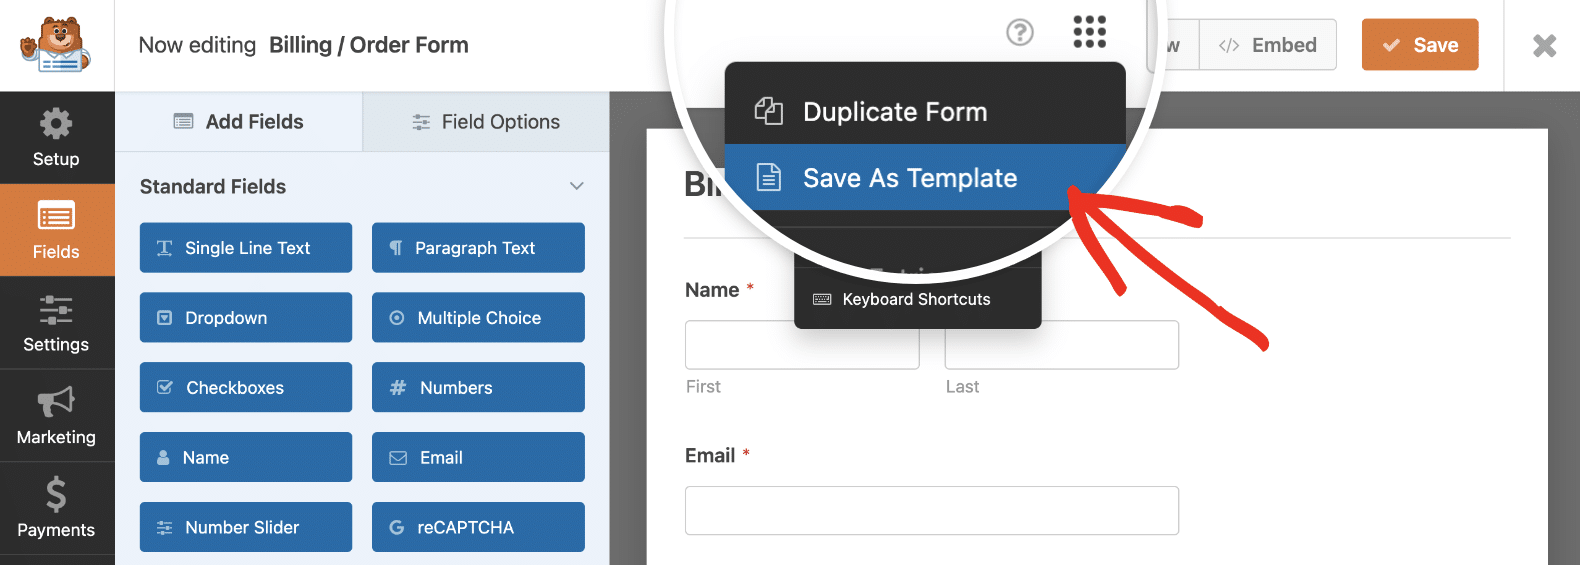 Saving a form as a template in WPForms